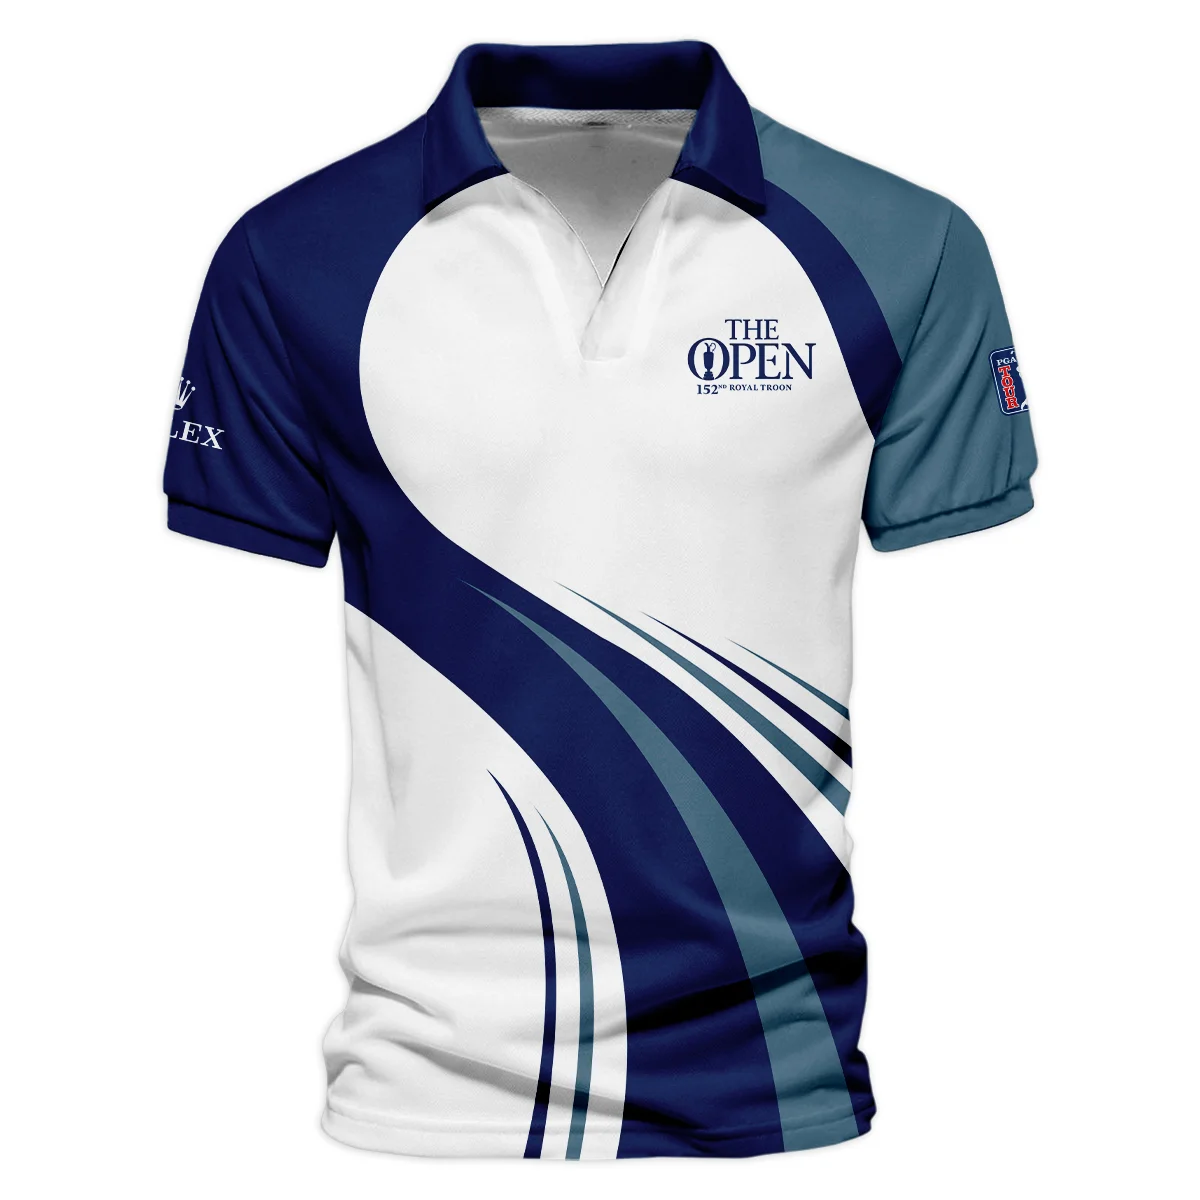 152nd Open Championship Rolex White Mostly Desaturated Dark Blue Vneck Polo Shirt All Over Prints  HOTOP270624A02ROXZVPL